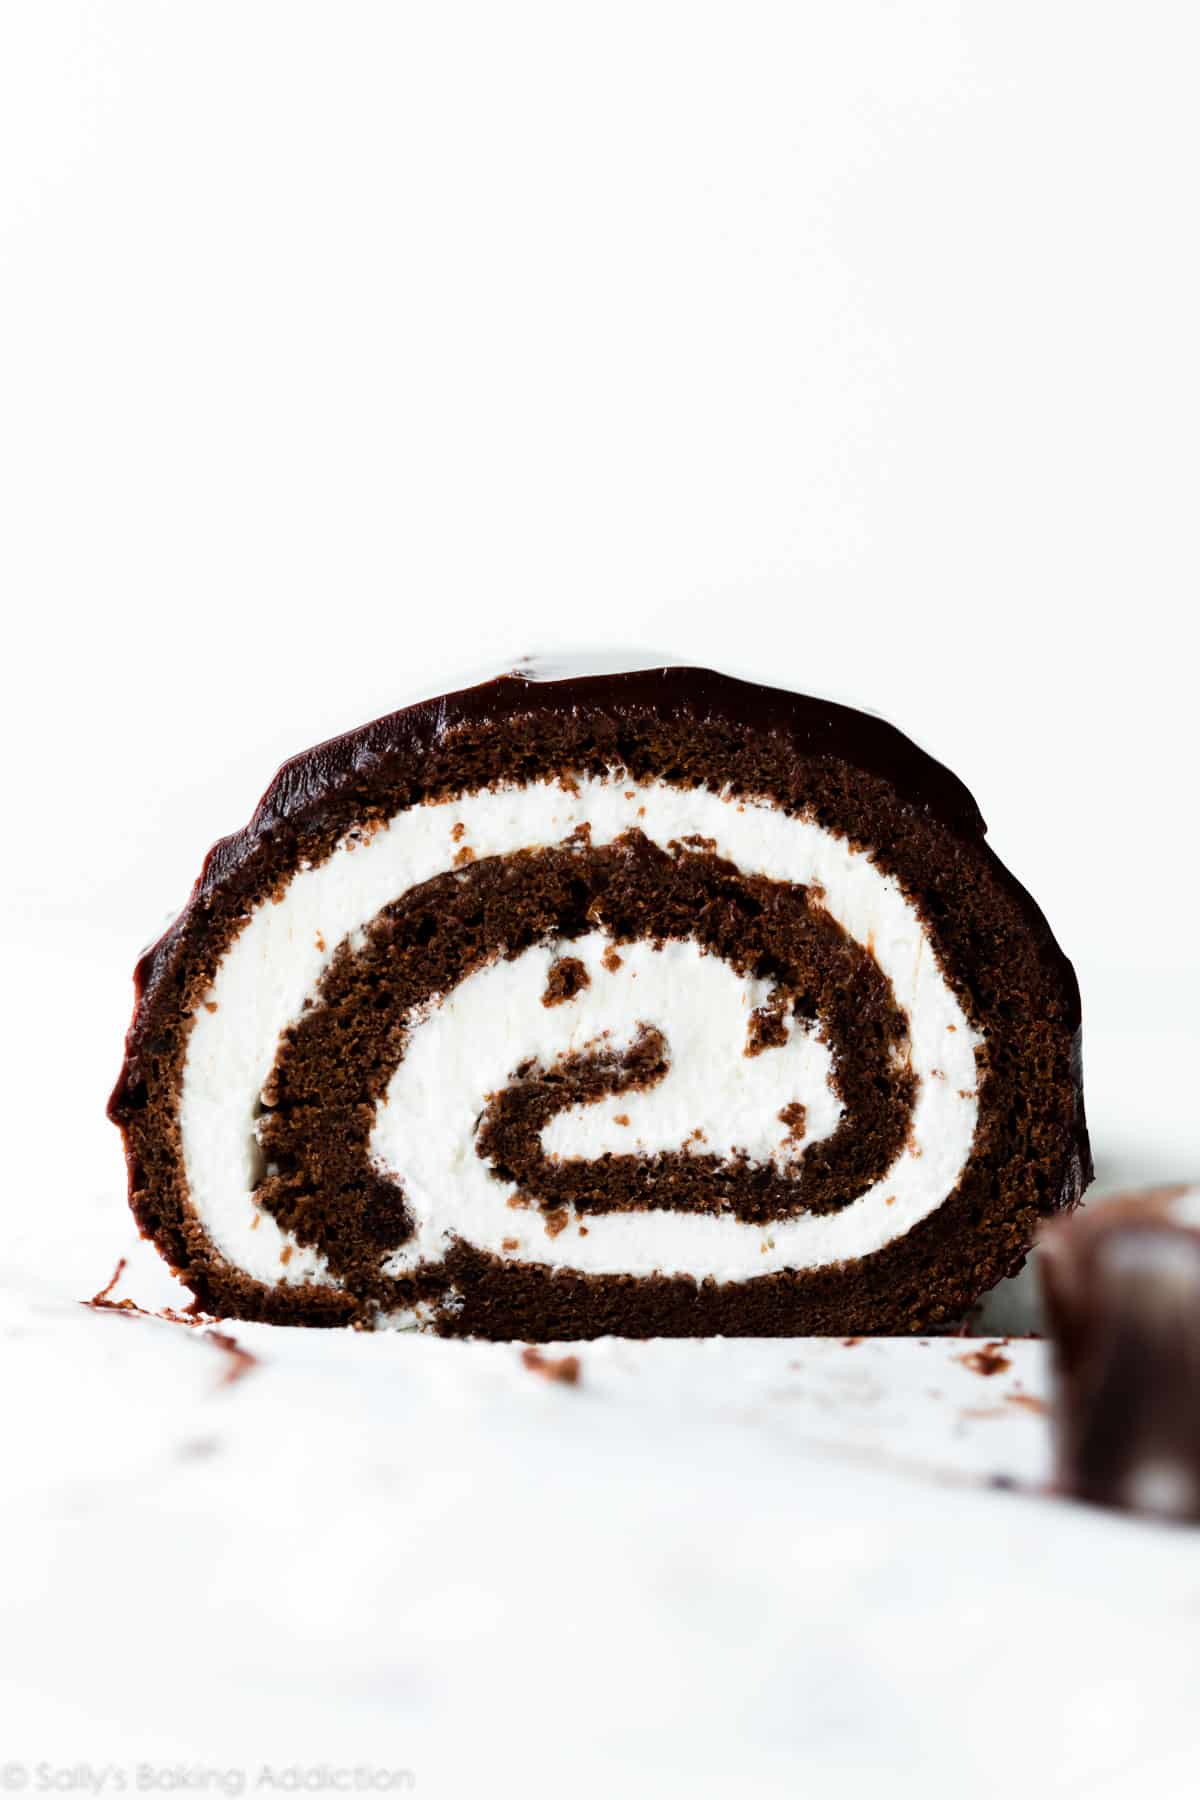 Chocolate Swiss roll cake with whipped cream filling